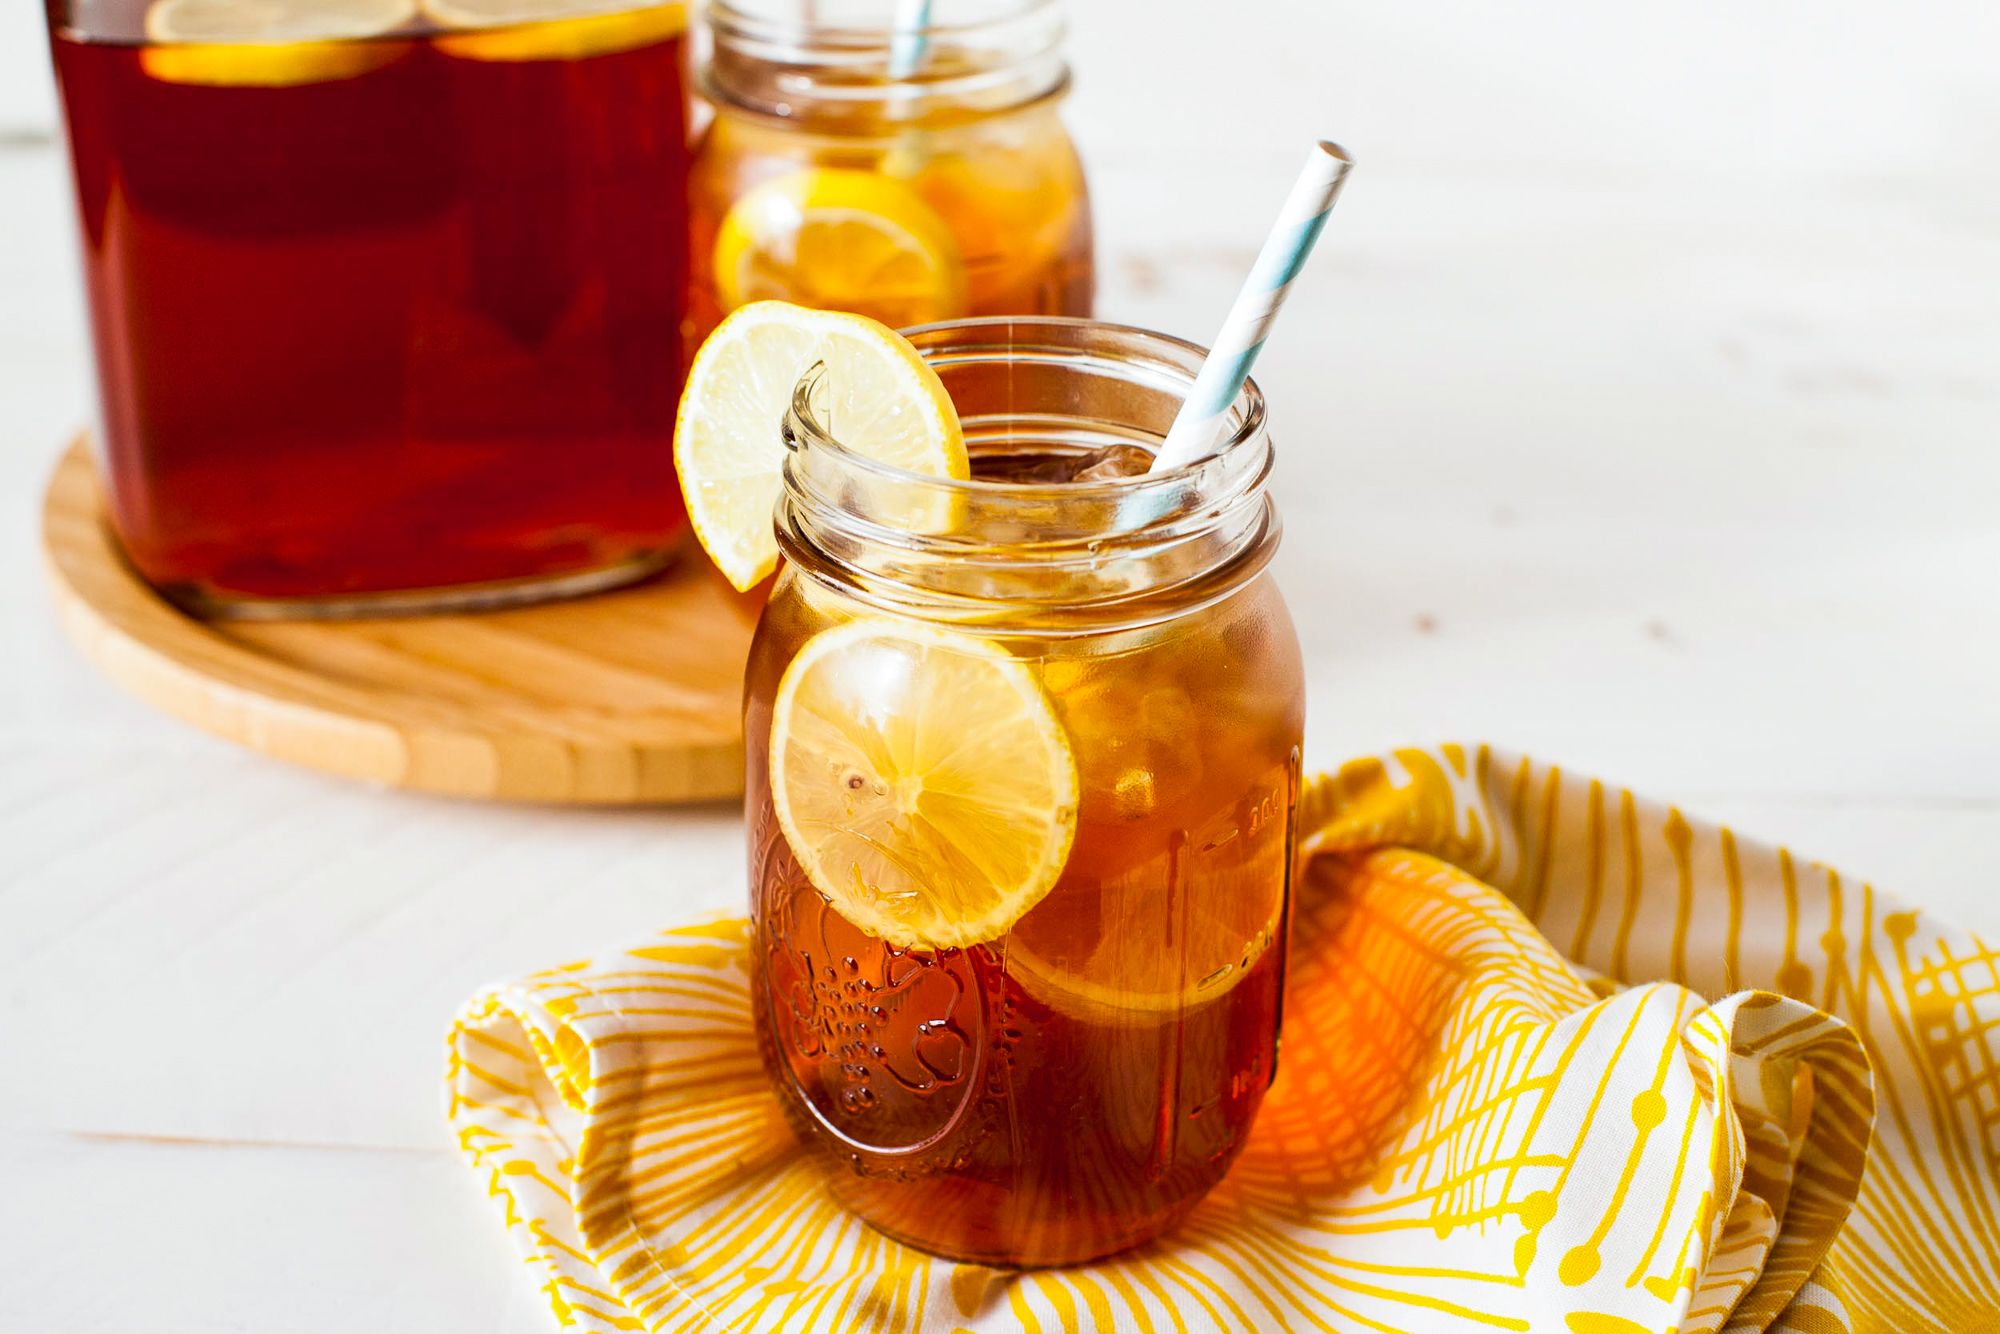 6 refreshing ways to flavor your iced tea